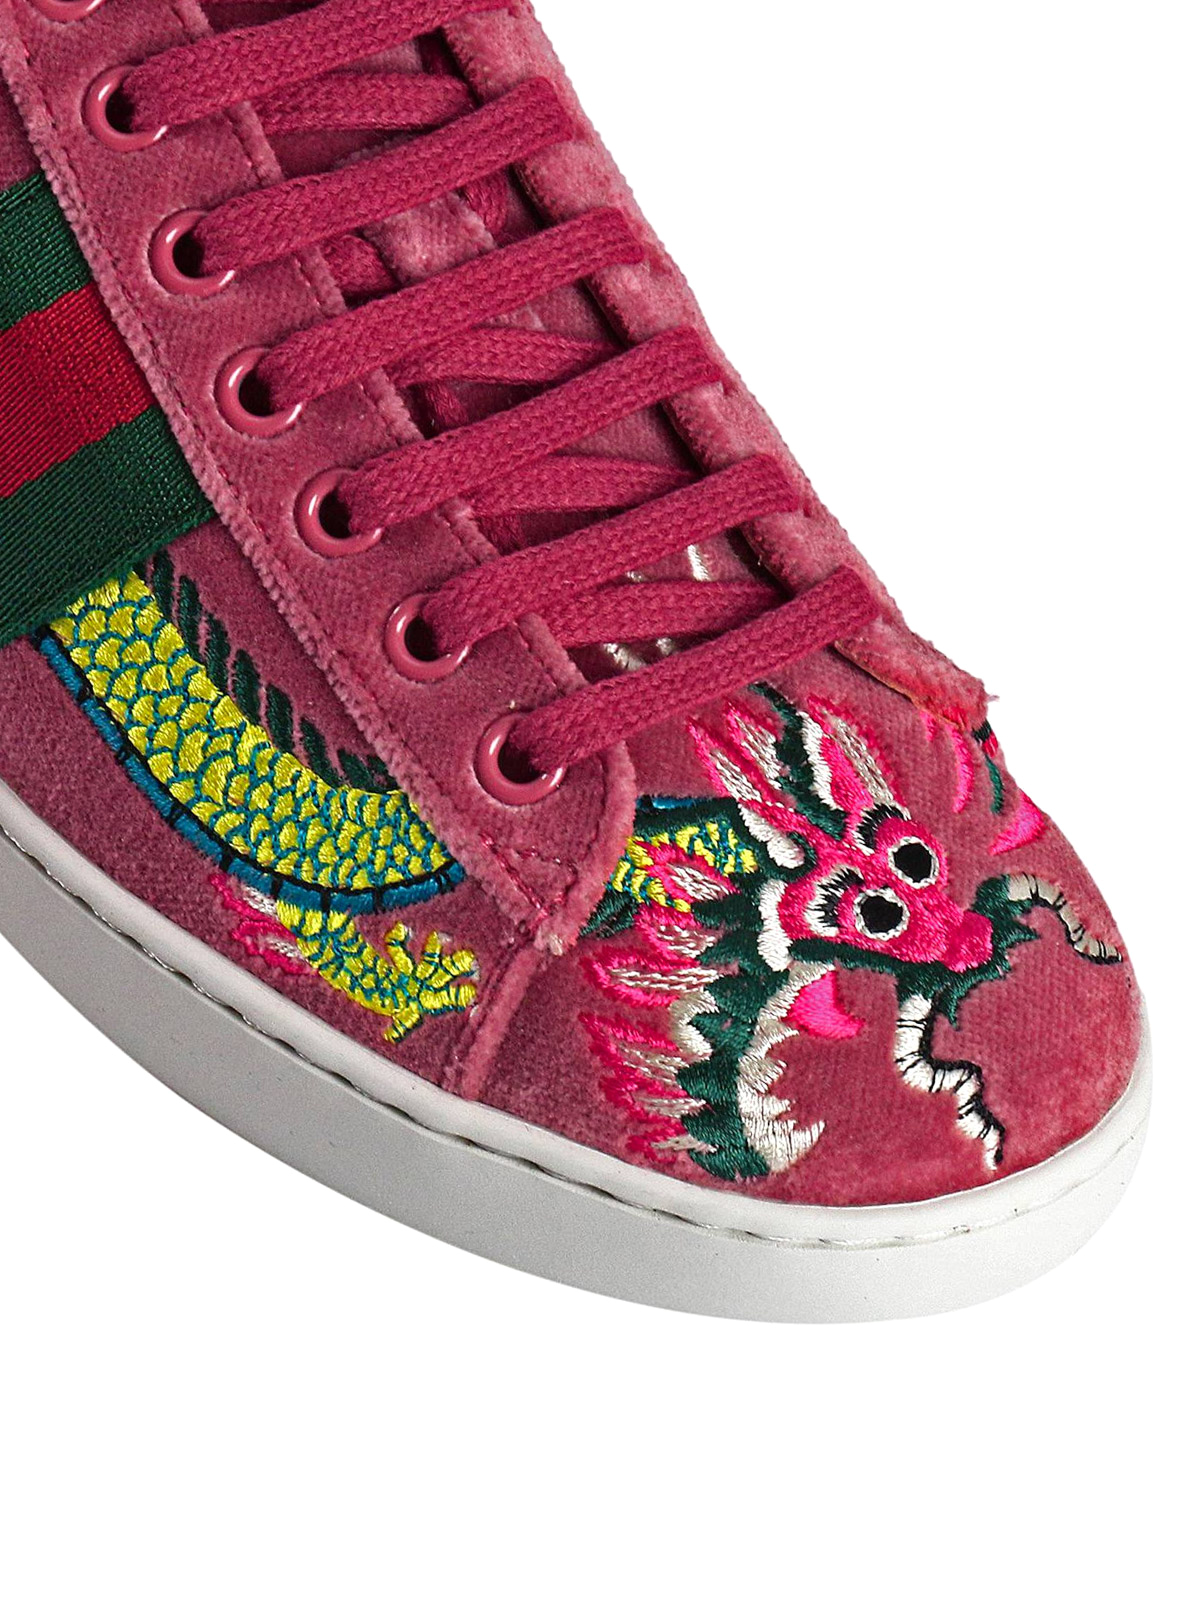 Trainers Gucci - Dragon embroidered sneakers - 475212FASJ06482